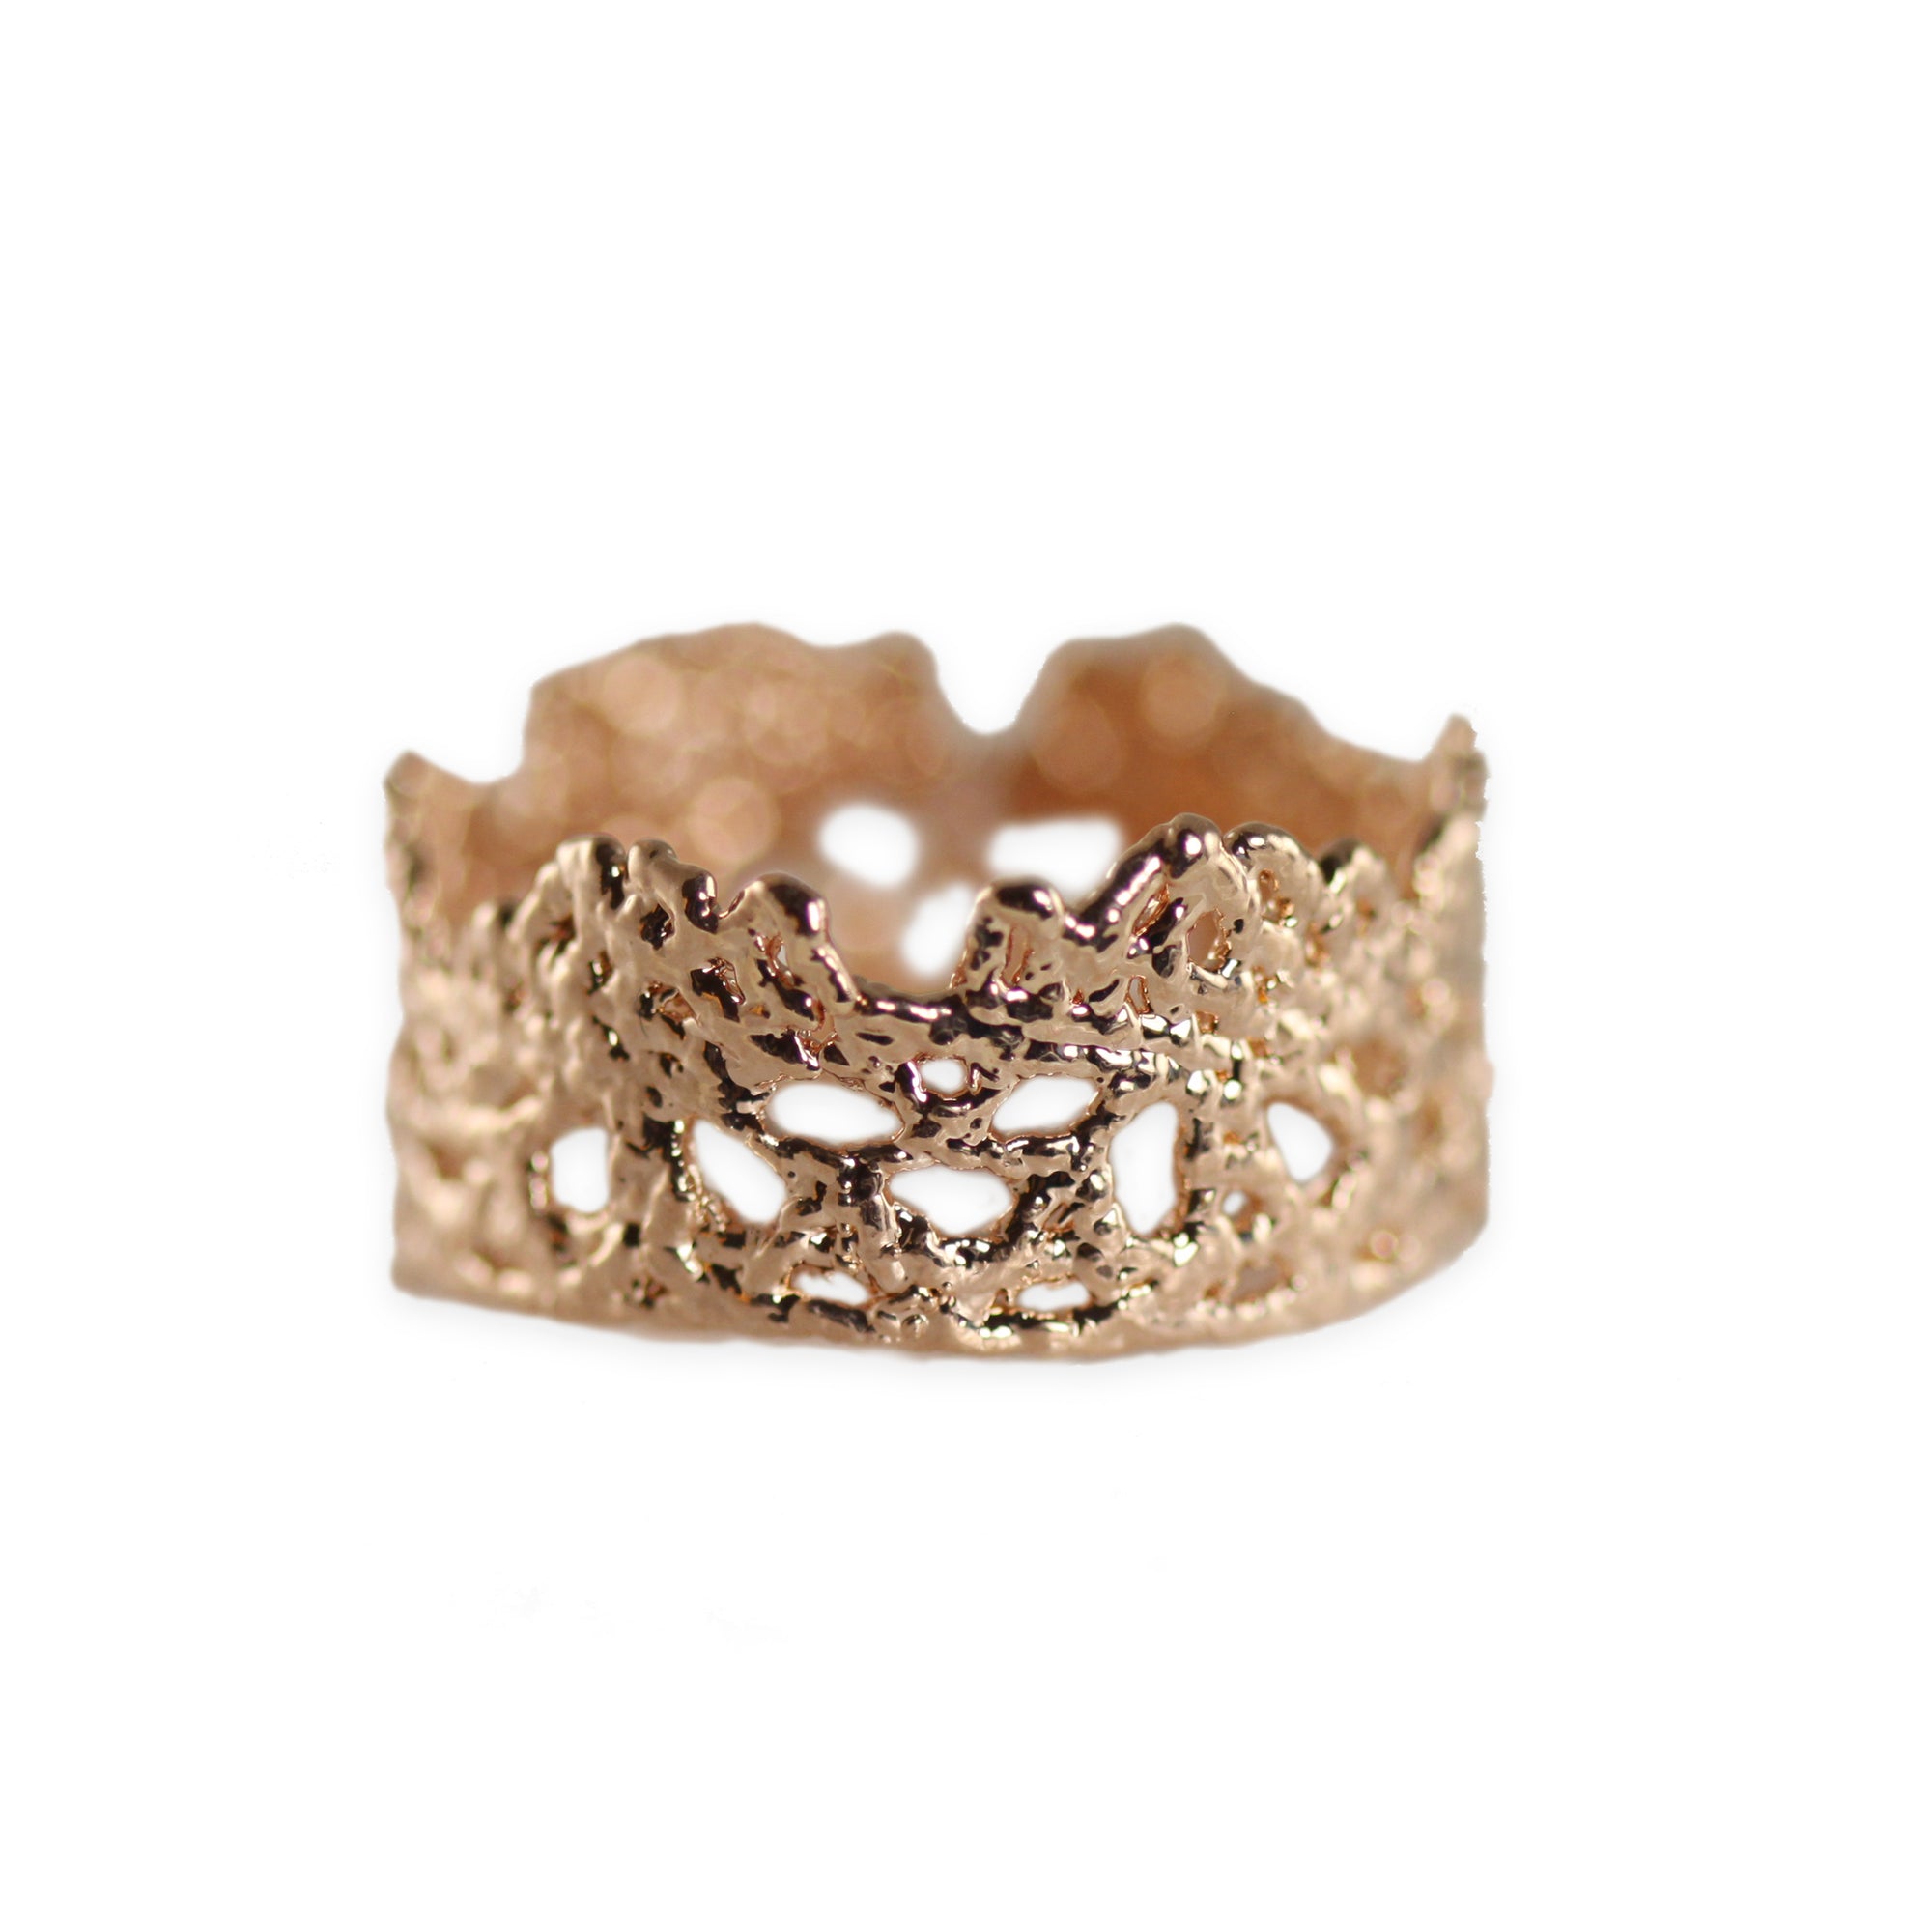 Lace crown rings in rose gold, 24k gold and sterling silver.